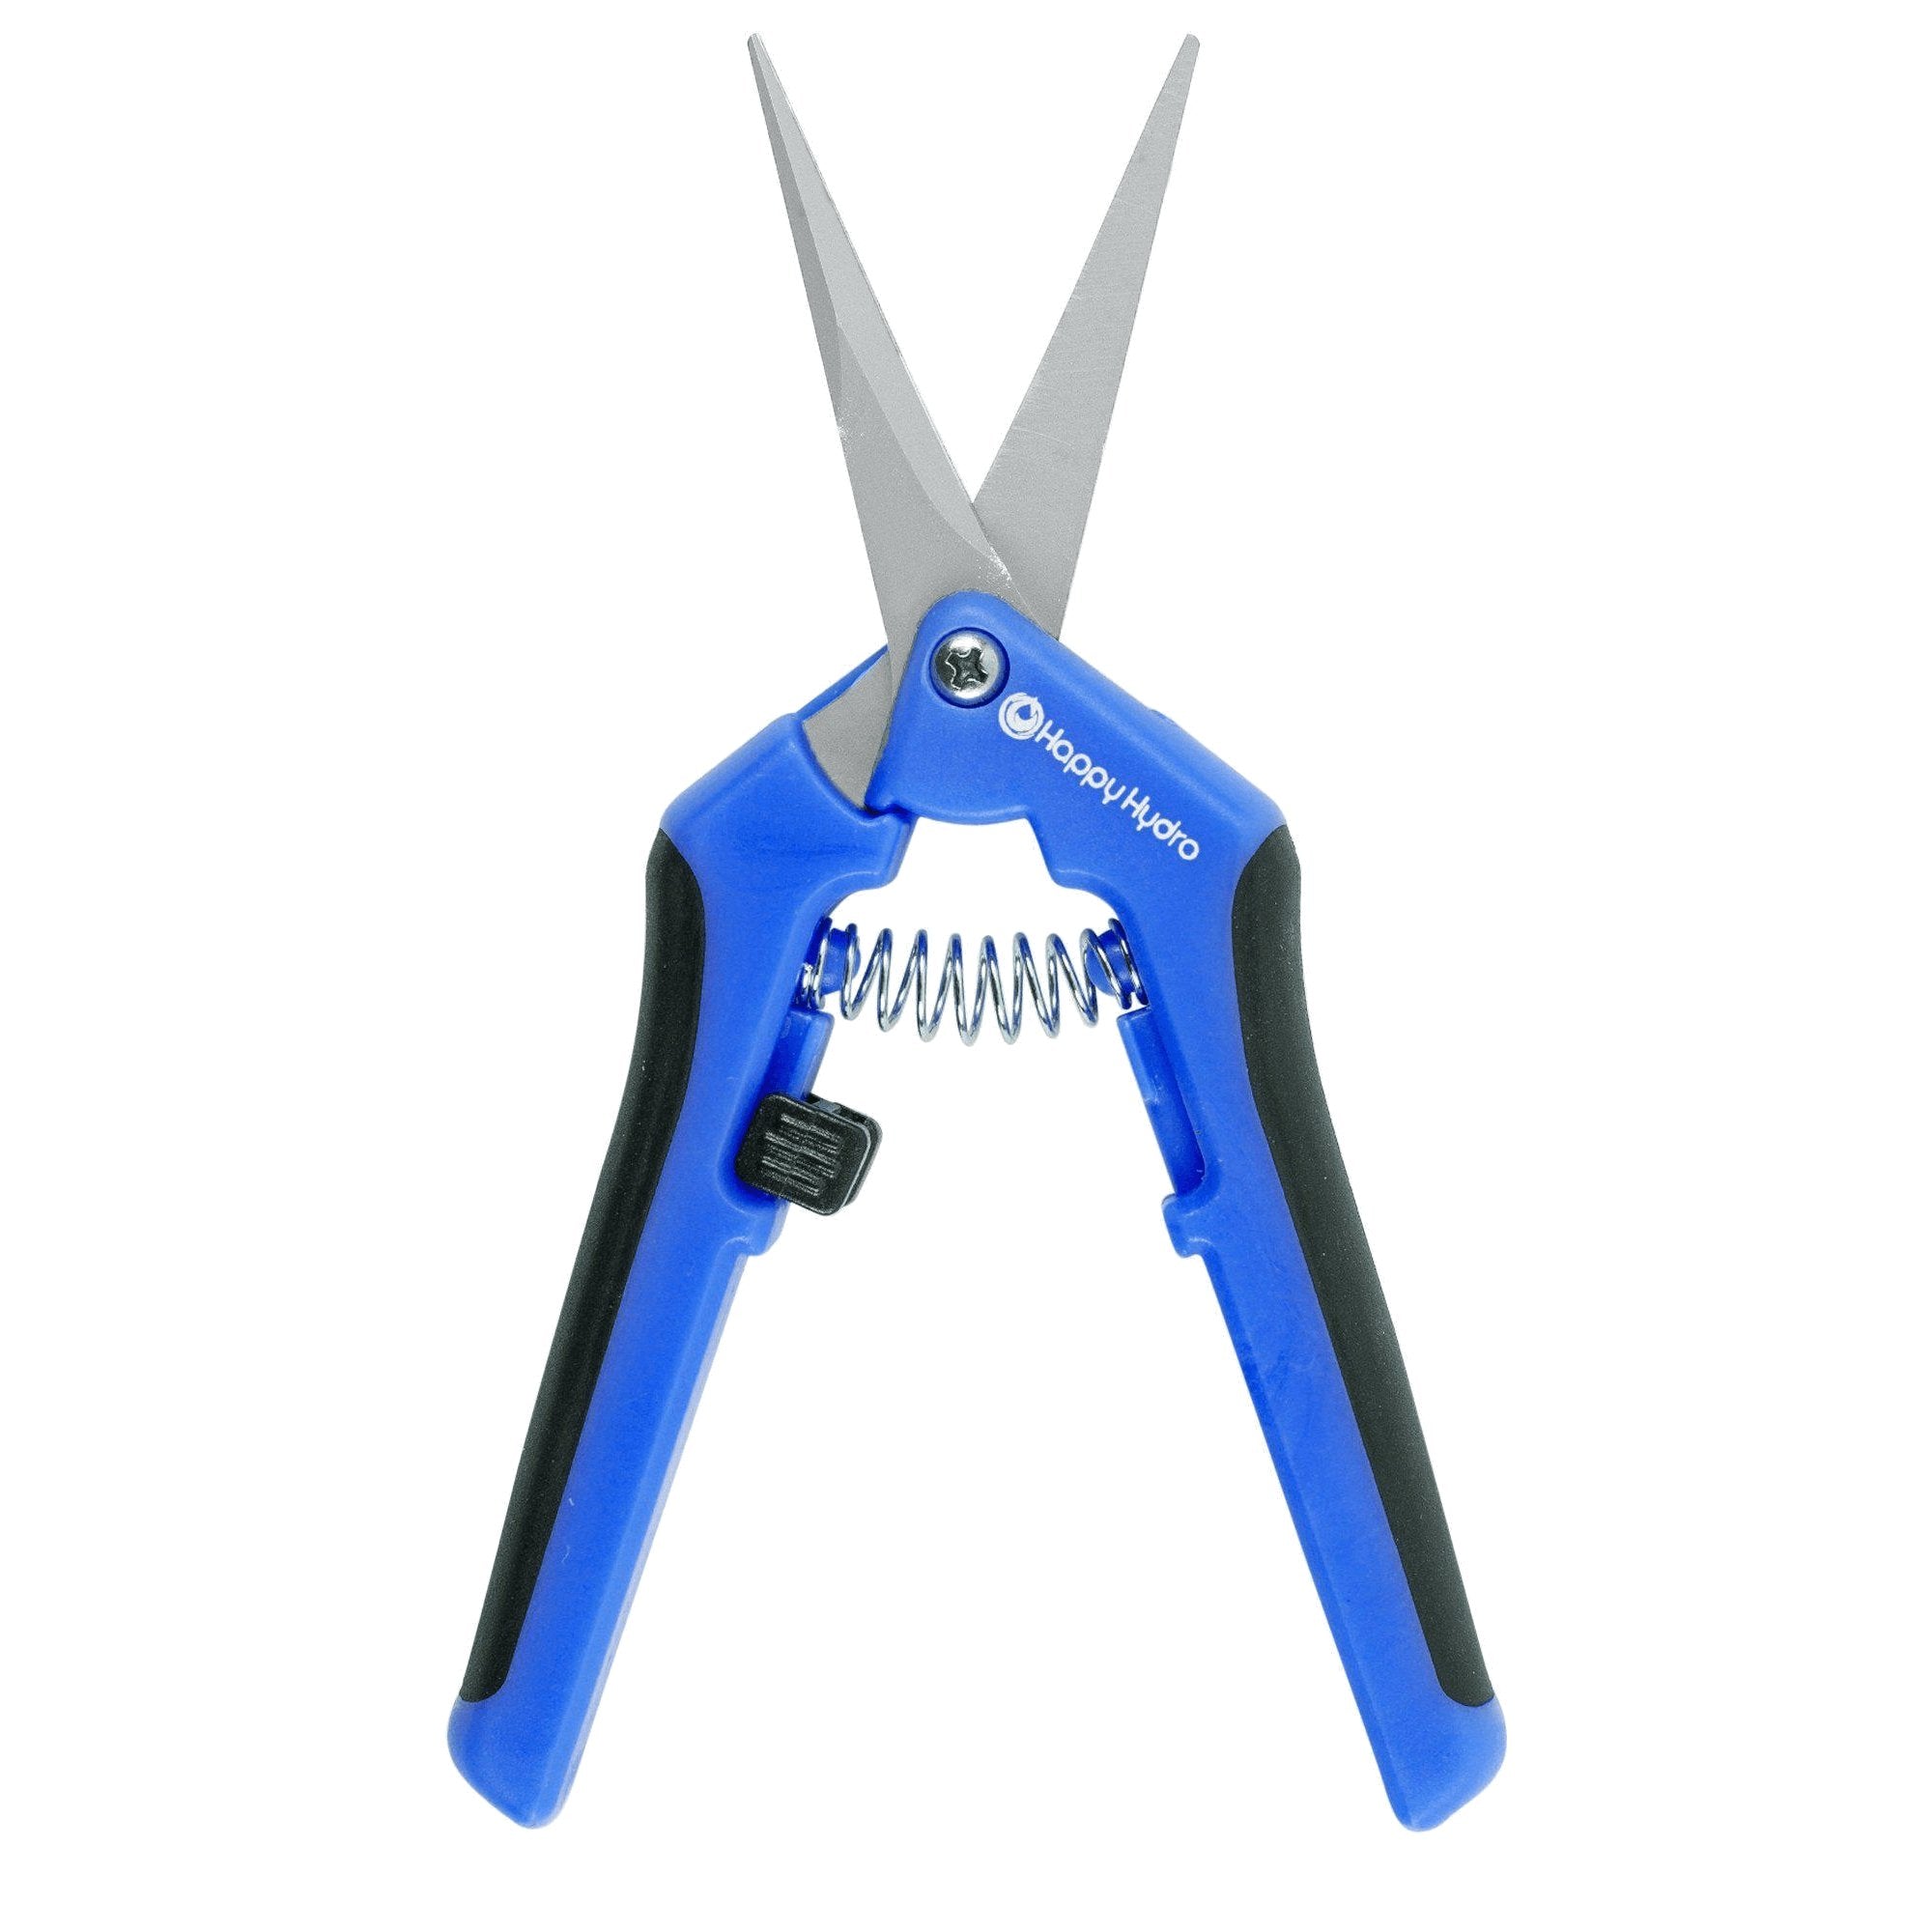 Happy Hydro Trimming Scissors with Curved Tip Stainless Steel Blades, Silver